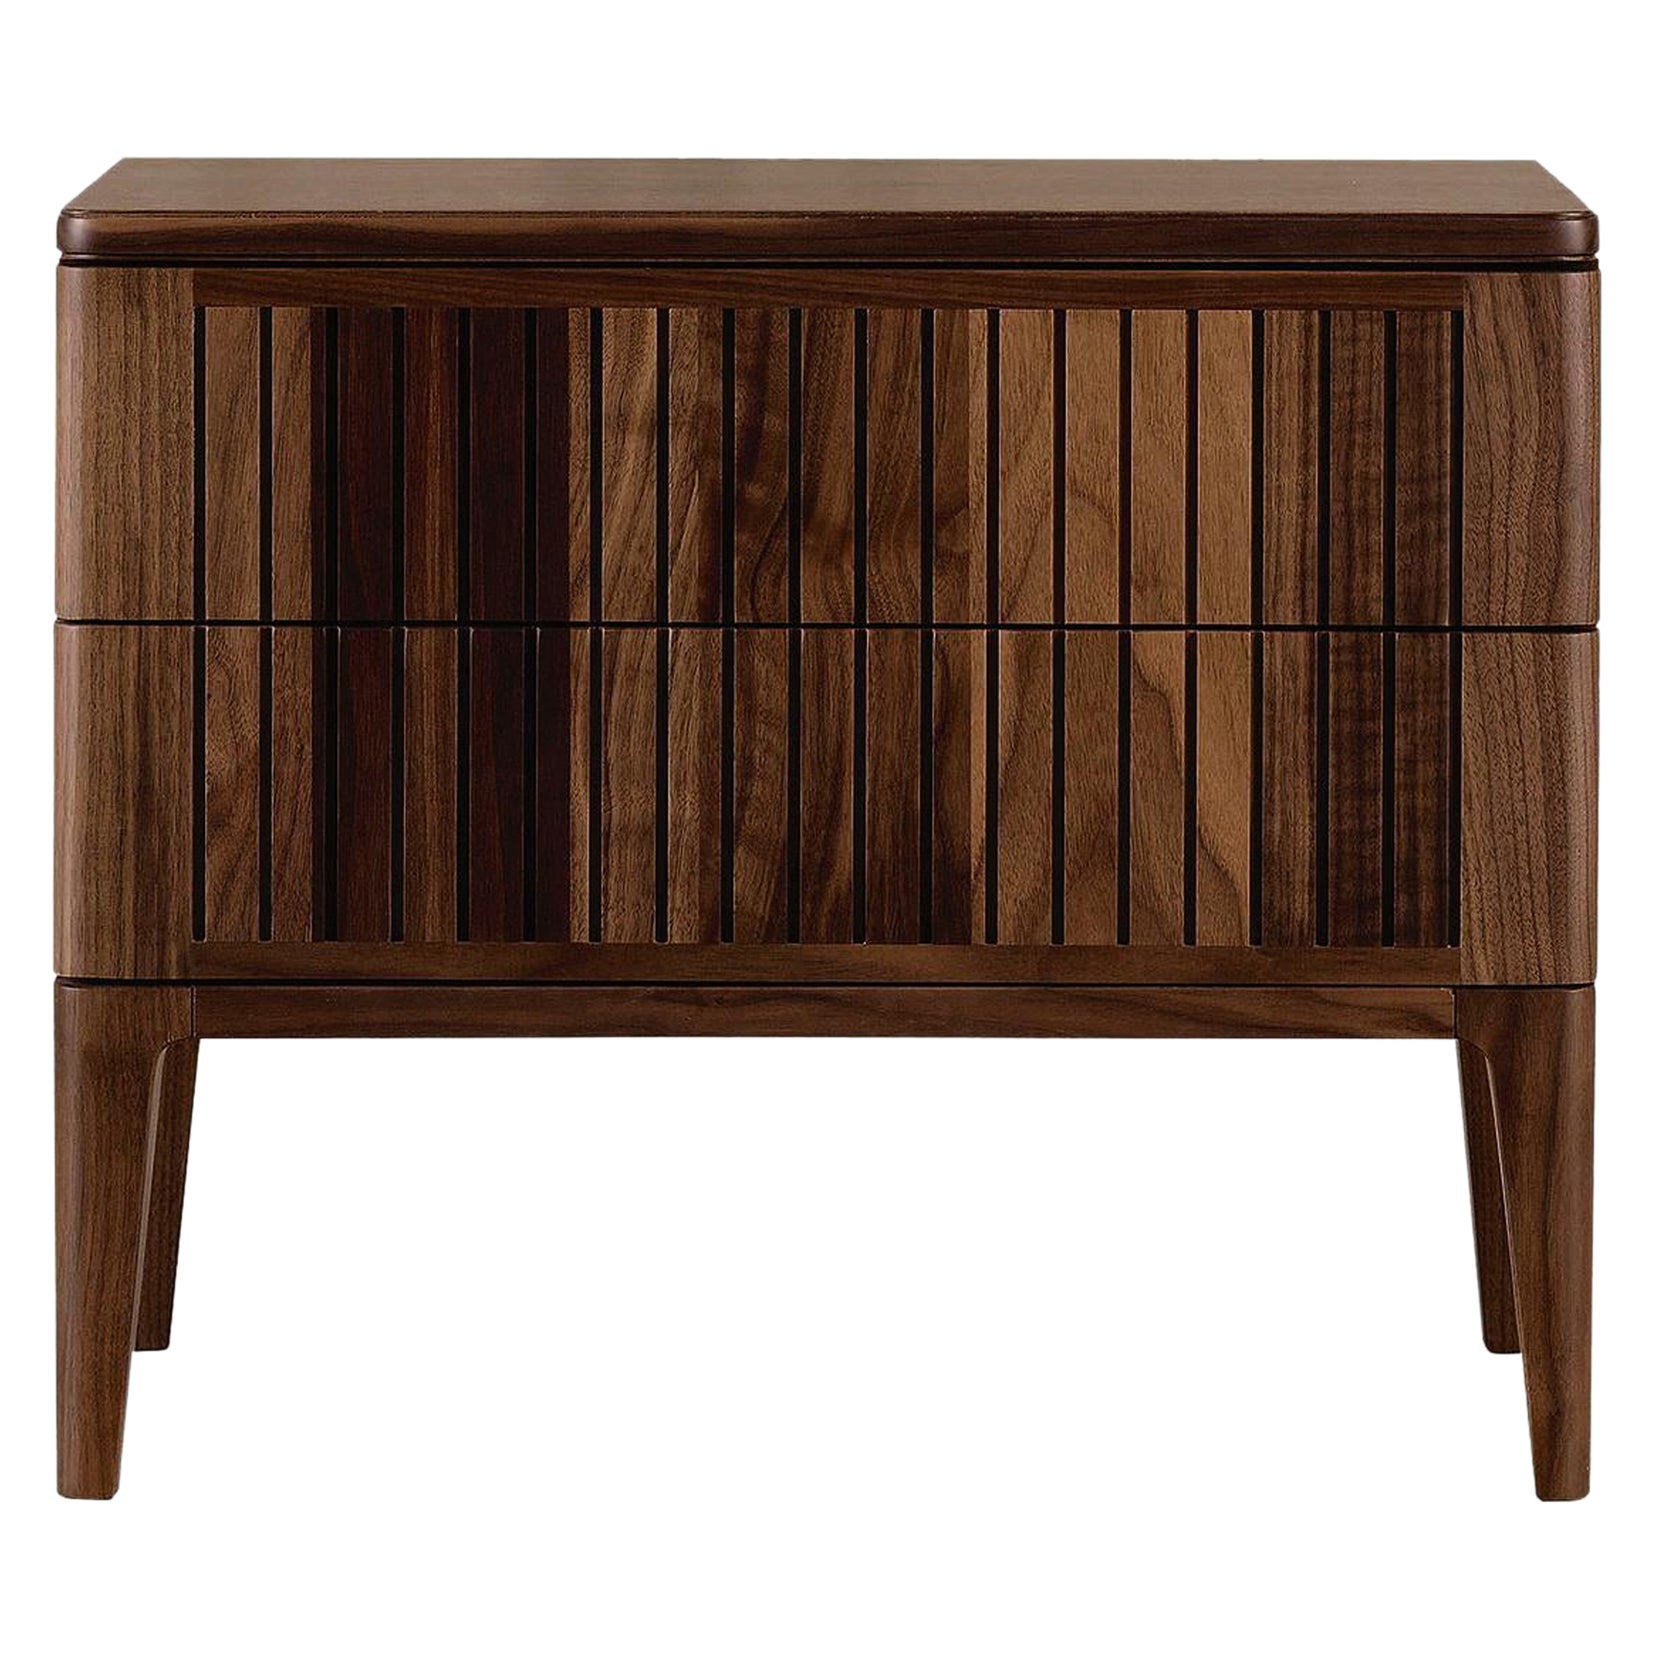 Eleva Solid Wood Bedside table, Walnut in Hand-Made Natural Finish, Contemporary